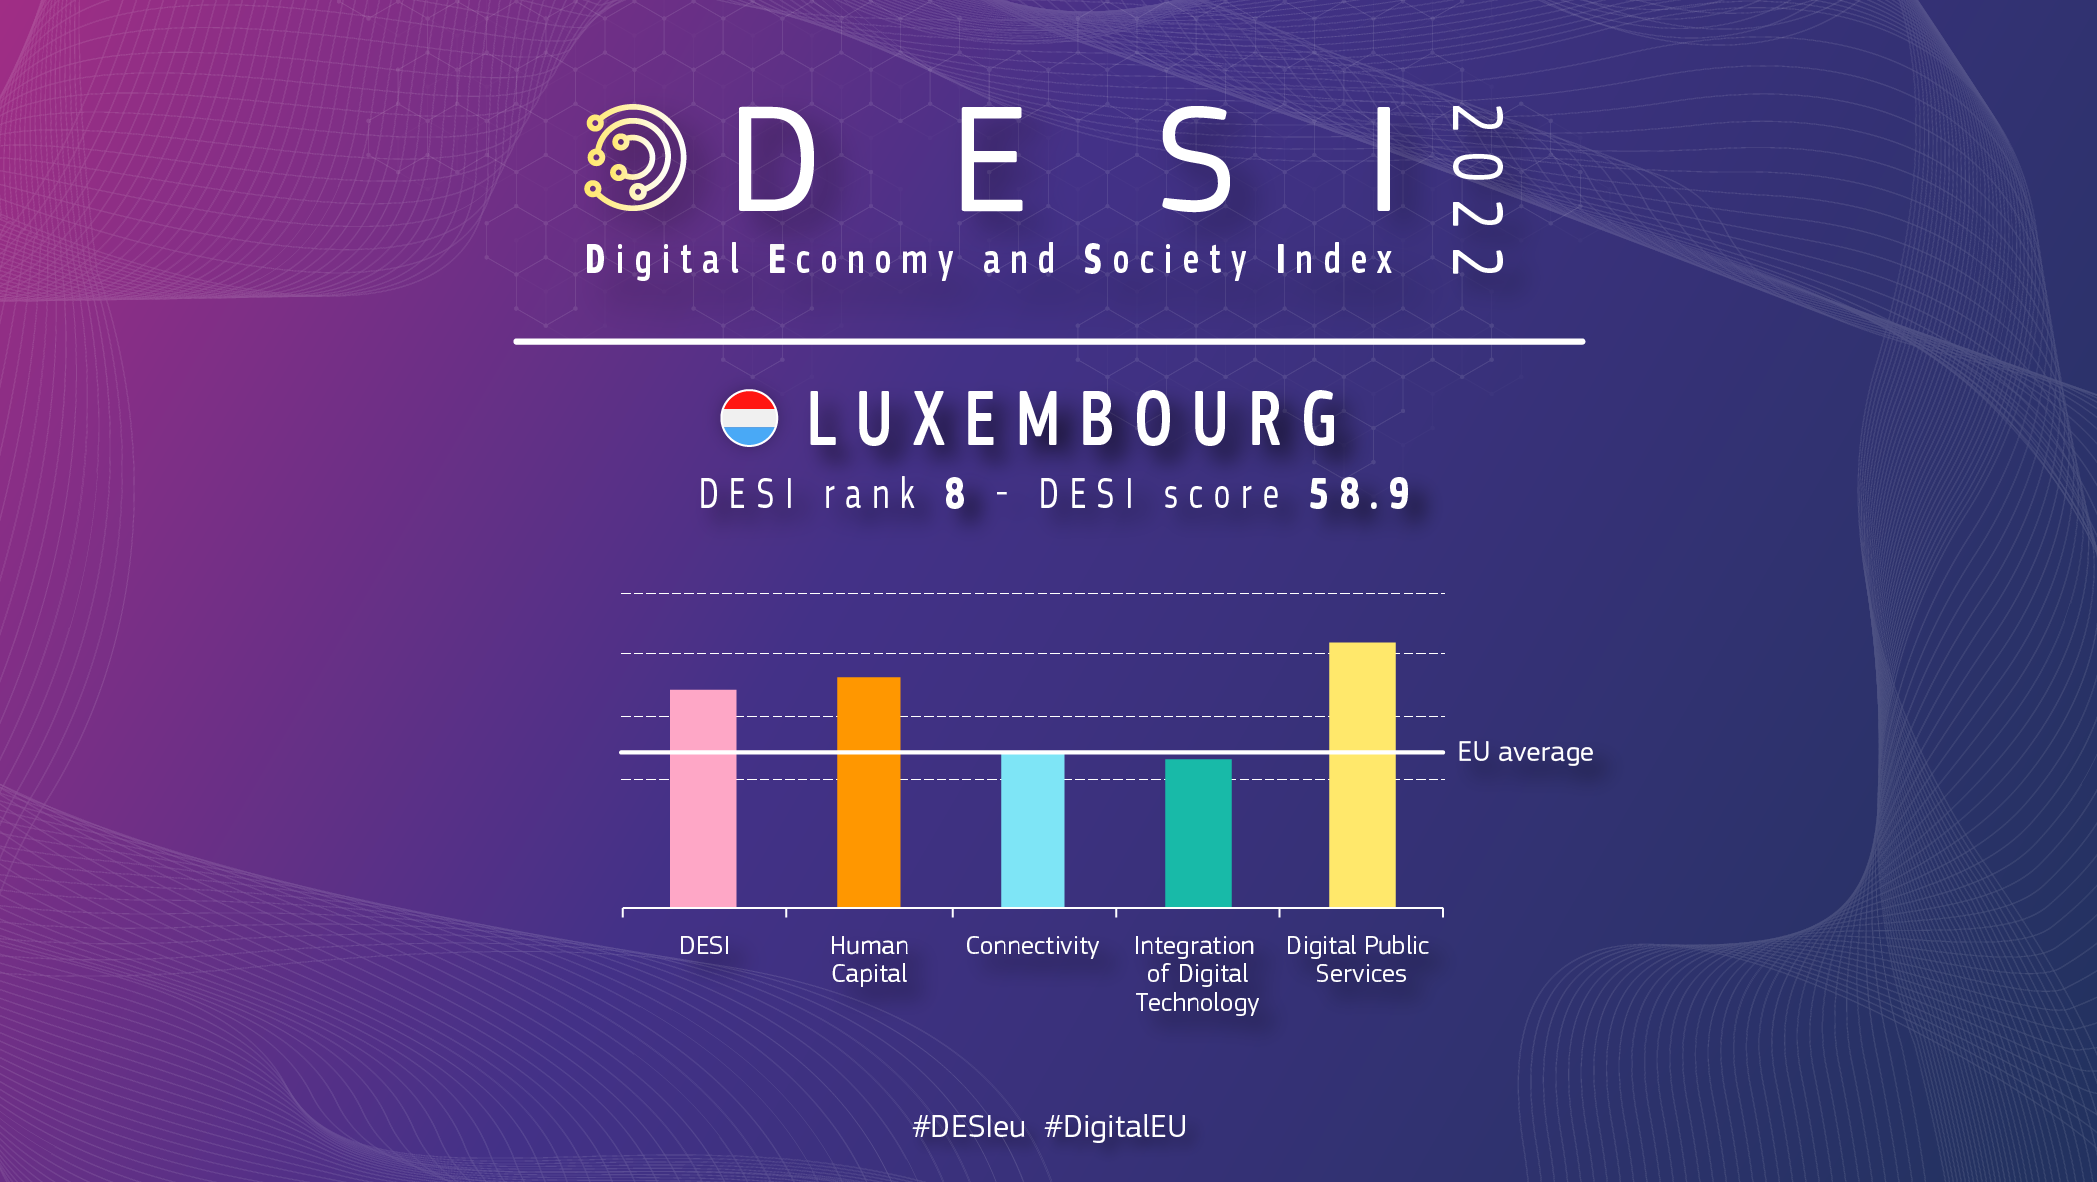 Graphic overview of Luxembourg in DESI showing a ranking of 8 with a score of 58.9